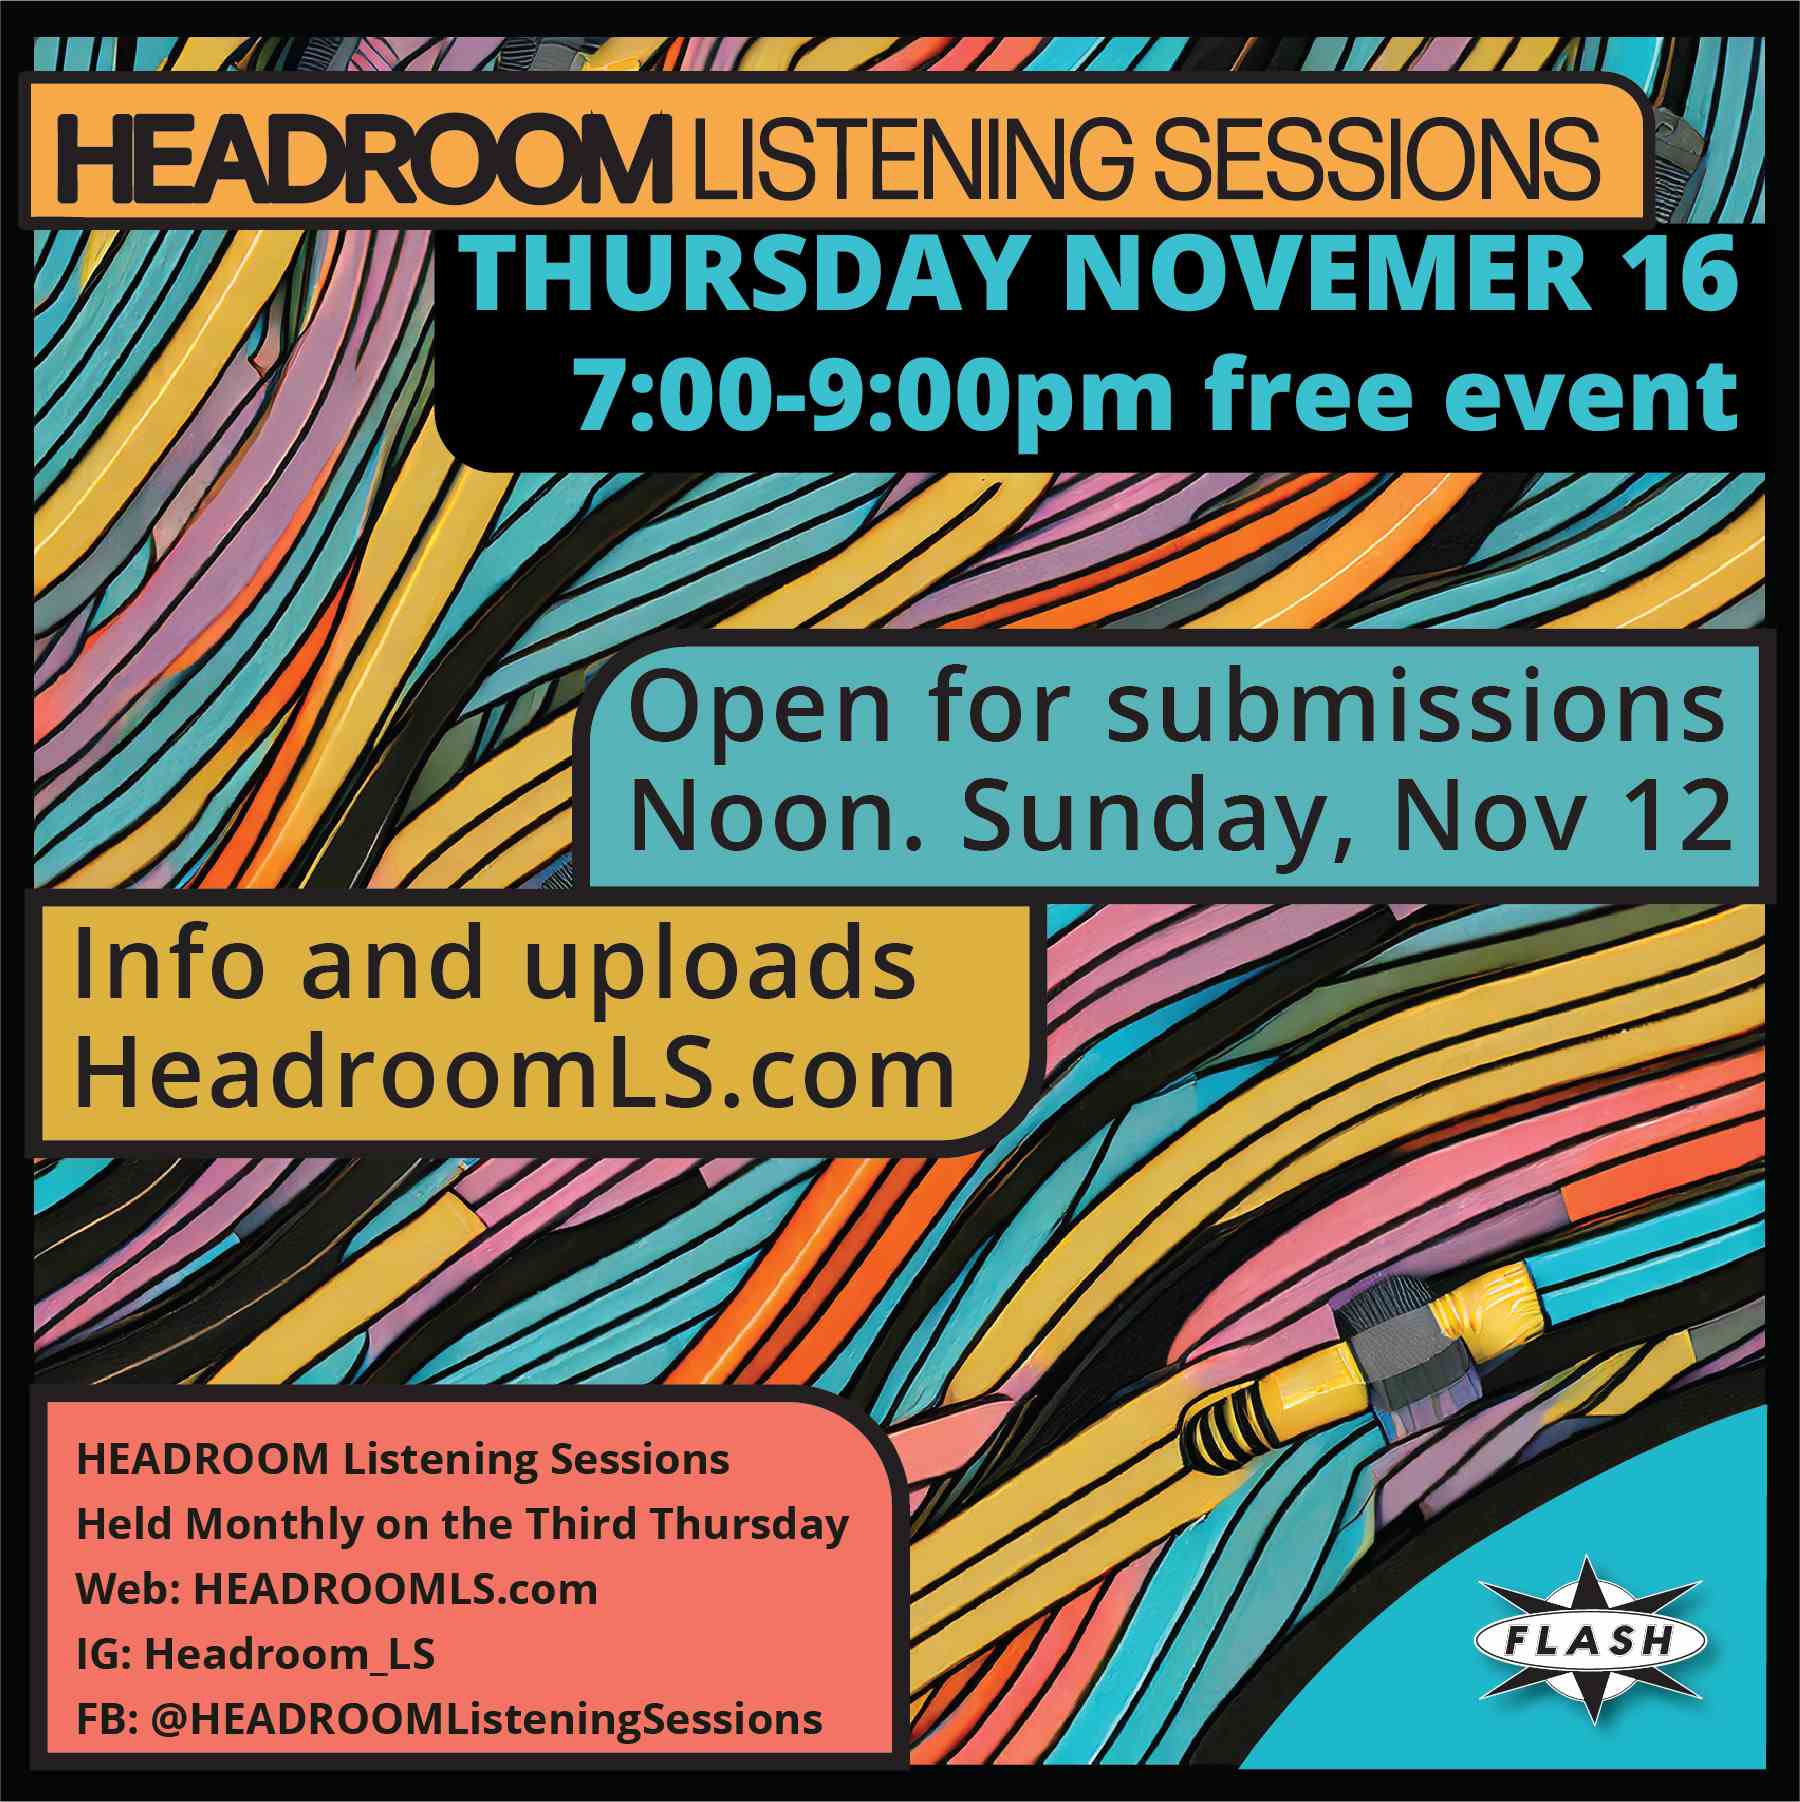 Headroom Listening Sessions event flyer